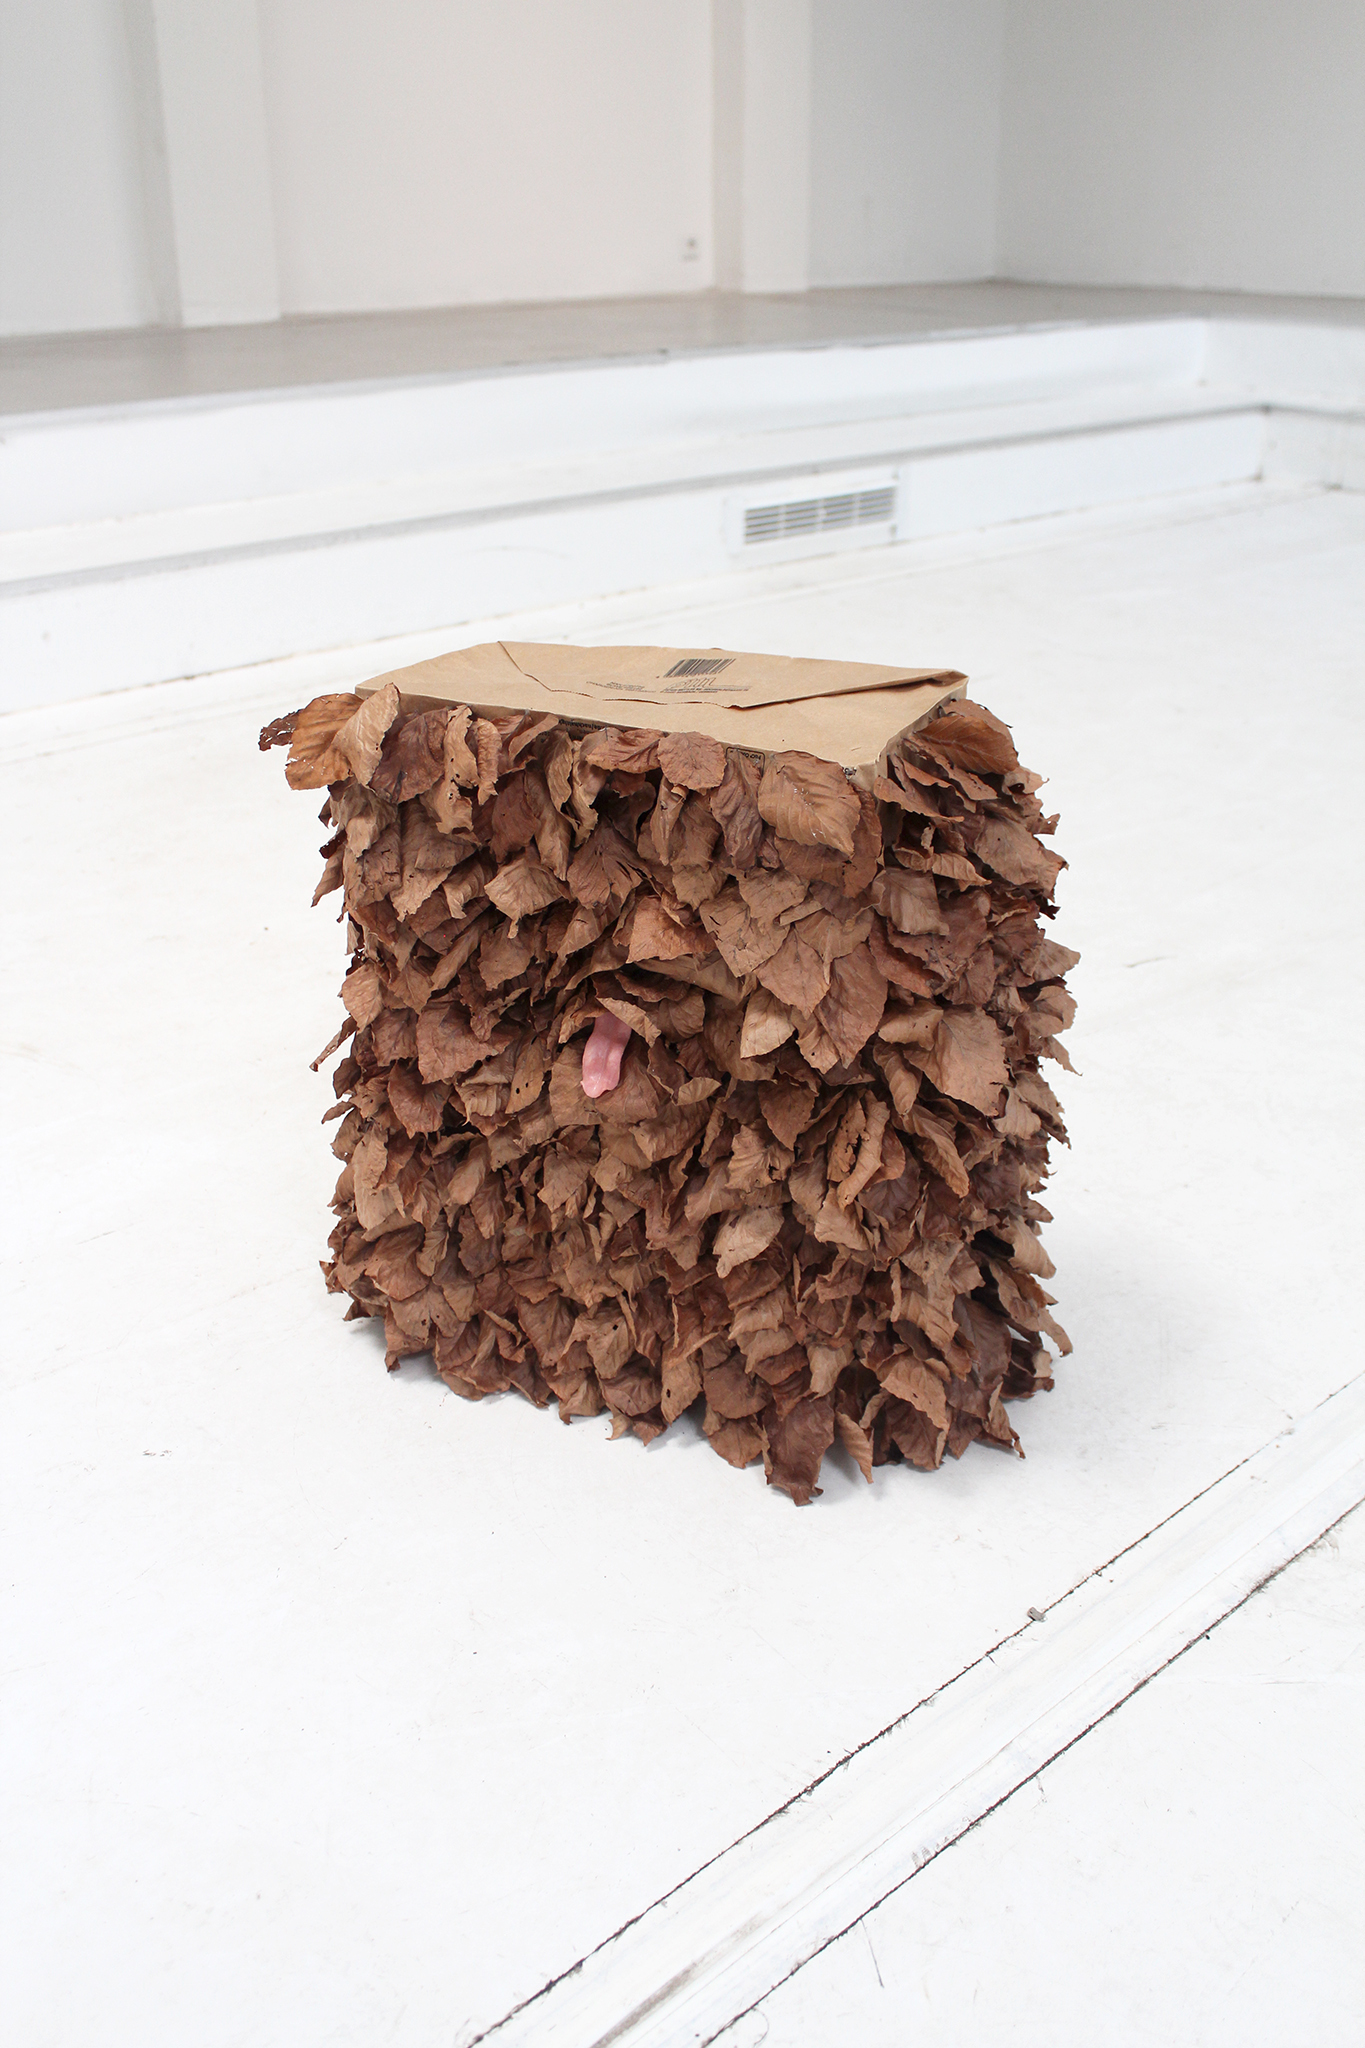 Vincent Scheers, Neigbour (2020), paperbag, leaves, glue, taxidermy foxtongue.